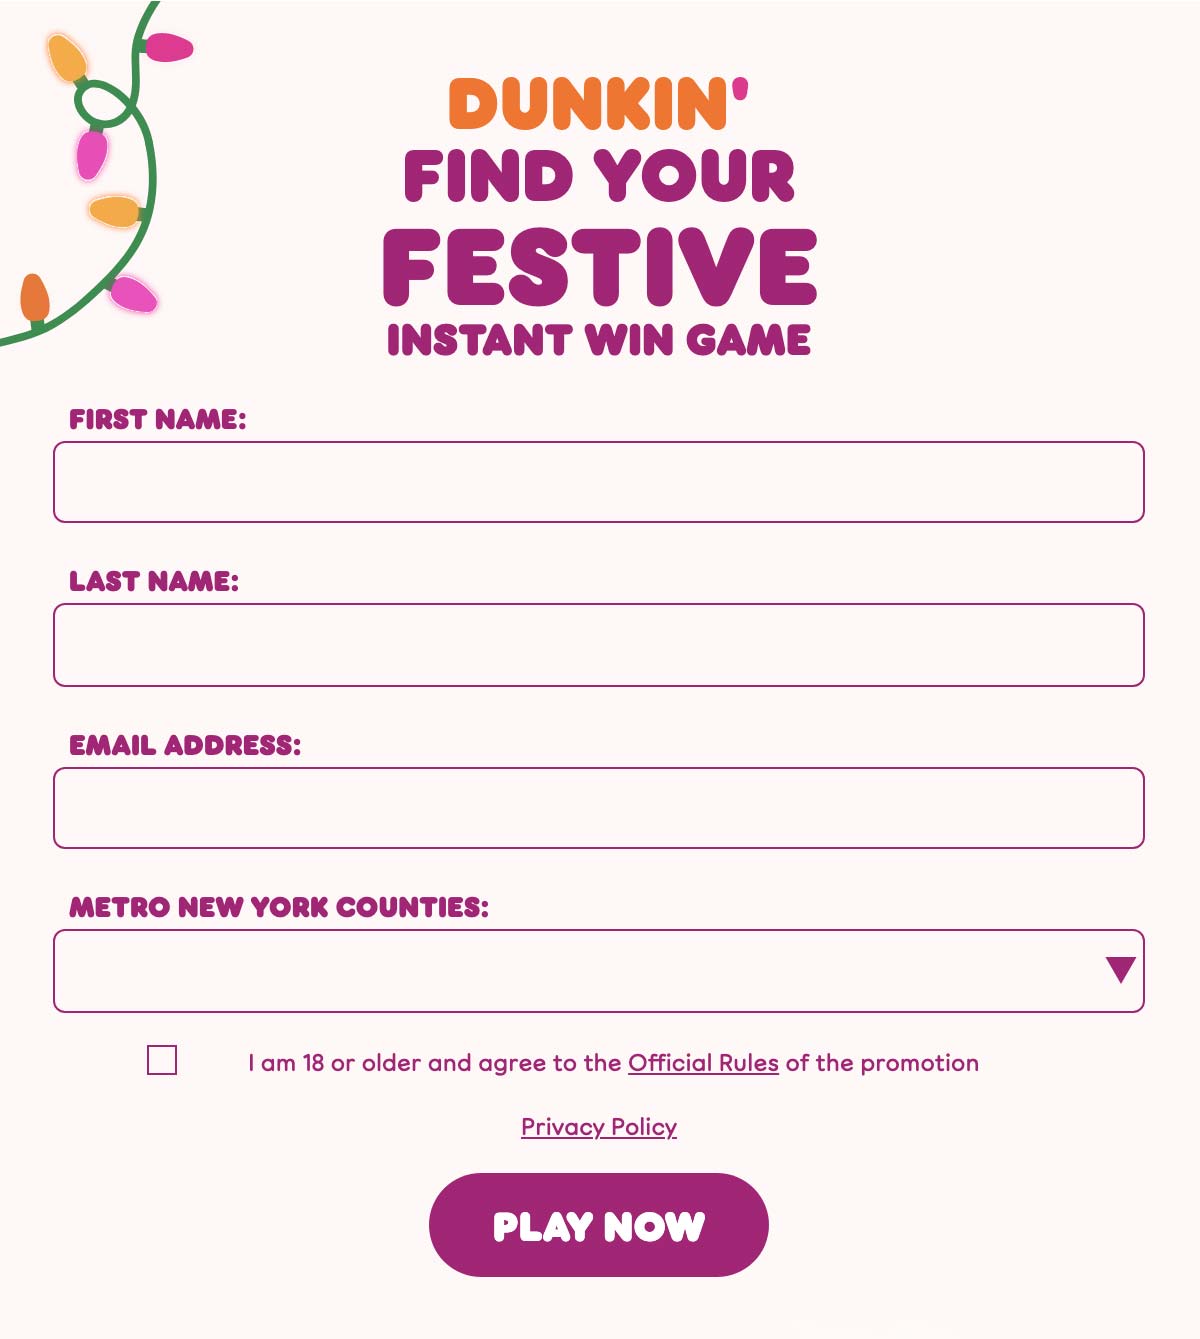 Dunkin' Find Your Festive Instant Win Game 2021 form.